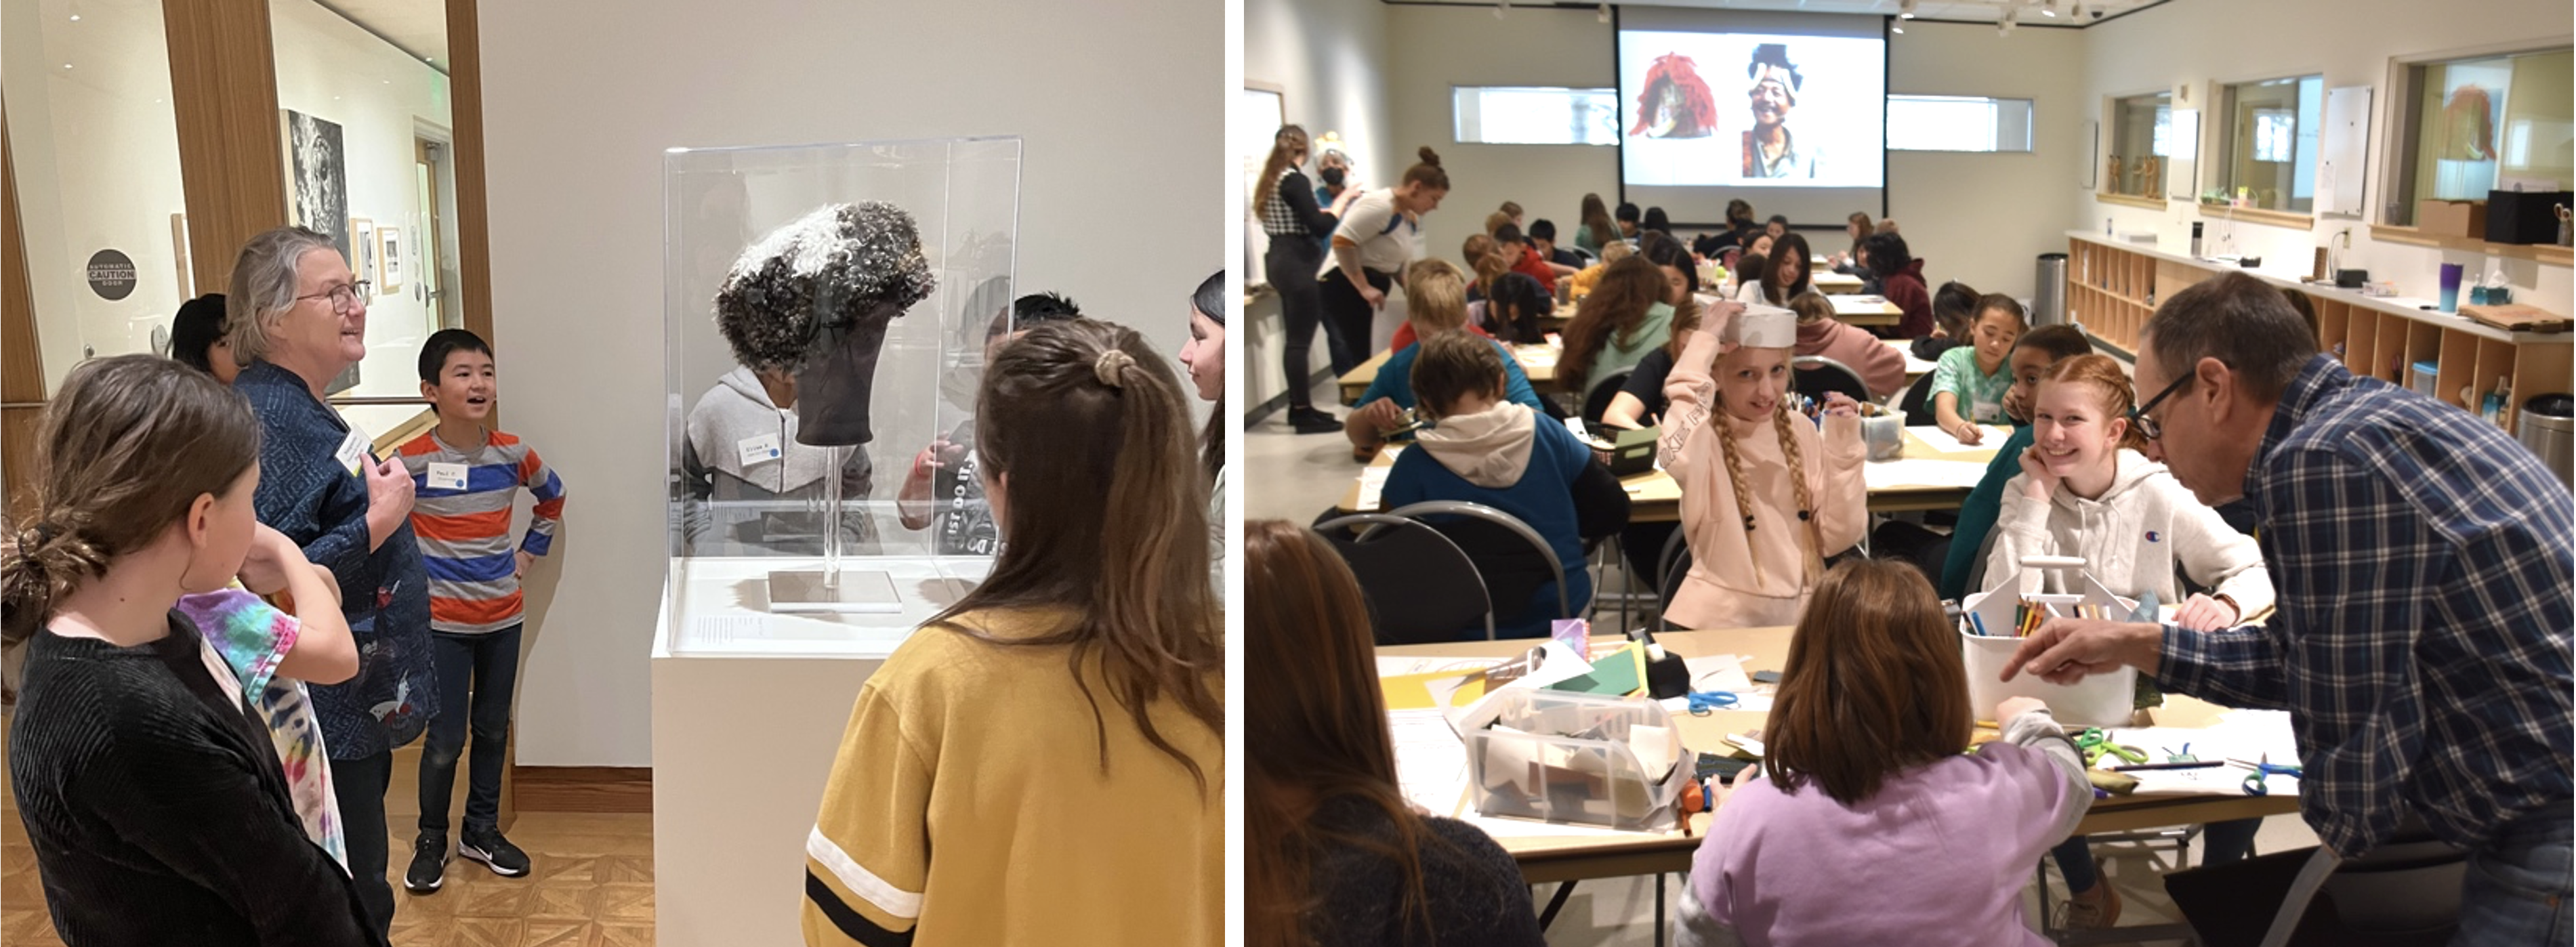 Two side-by-side images, on the left a group of students and docent smile while they view a curly sheepskin hat on view in galleries; the second image on the right shows Museum classroom filled with tables of students making paper hats while a Museum staff member tells to the group at the closest table in the photograph.